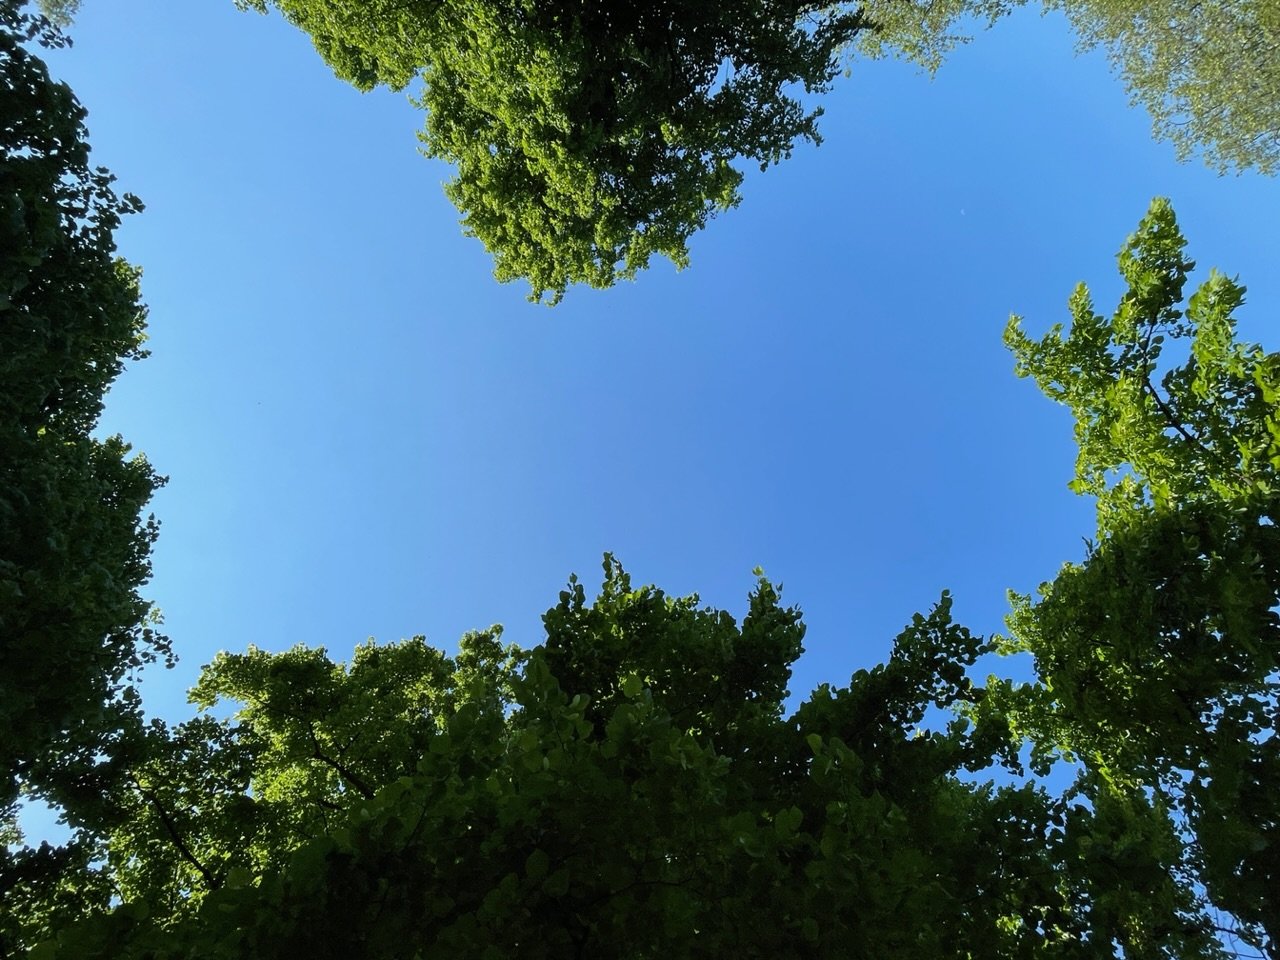 Looking up at the blue sky through a gap between green trees